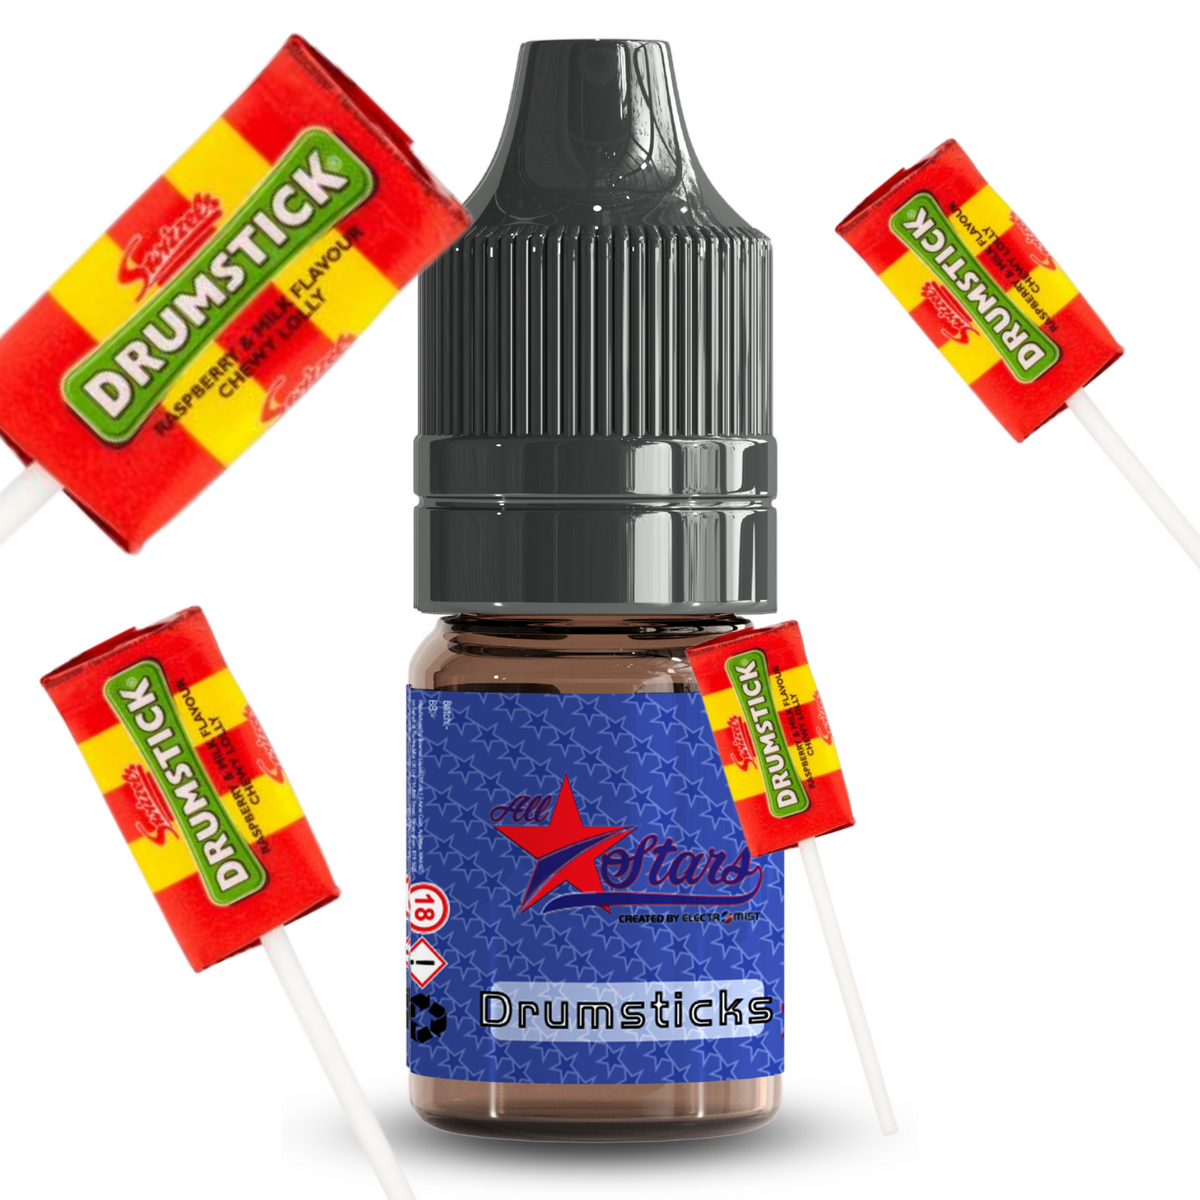 All Stars E-Liquid from the vape brand you can trust, Electromist, . Get your taste buds ready for a flavour sensation, Drumsticks. Nicotine Content: 6mg/12mg/18mg Products may contain nicotine. For over 18s Only ejuice, vape pen, eliquid, e cigarette, 10ml, vaping, cloud, PG, VG, 60/40, vape liquid, Flavour, TPD